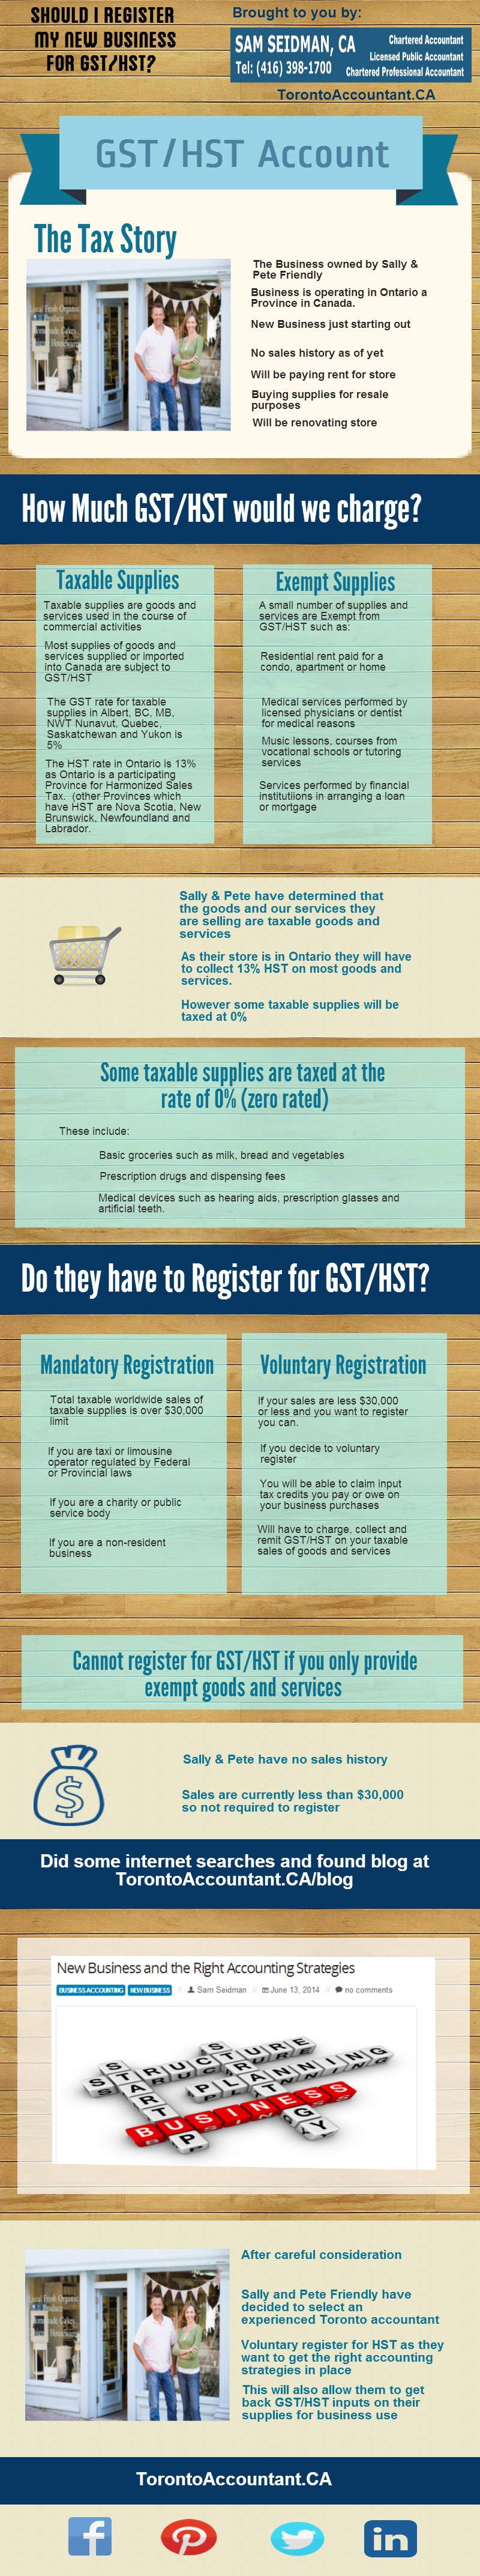 do-you-need-to-register-with-cra-for-gst-hst-for-your-new-business